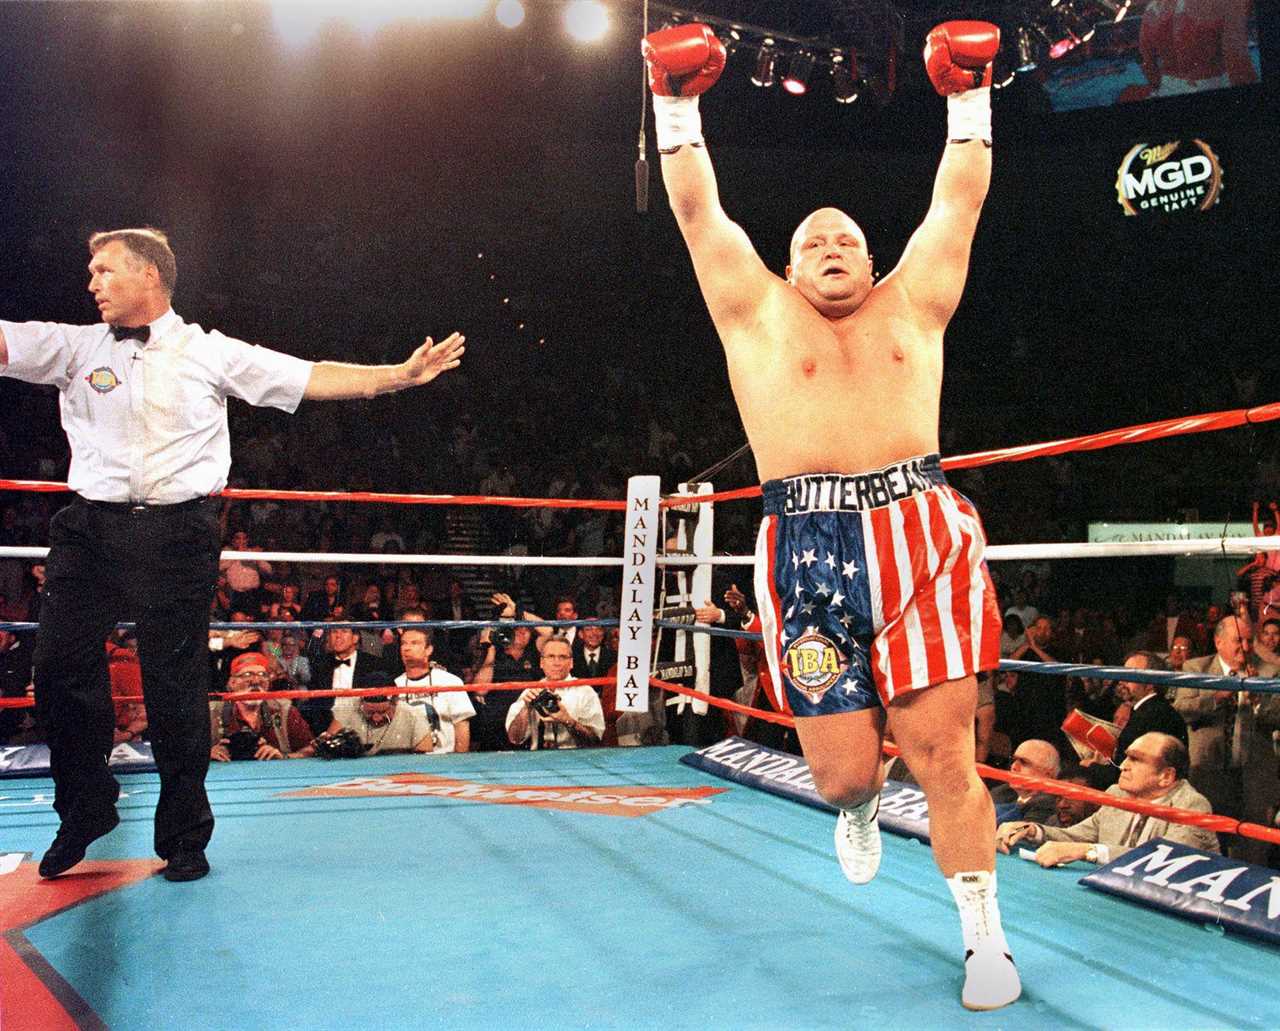 Butterbean refused Mike Tyson fight in a dark place, but is now ready to accept after being brought down from 35 STONE